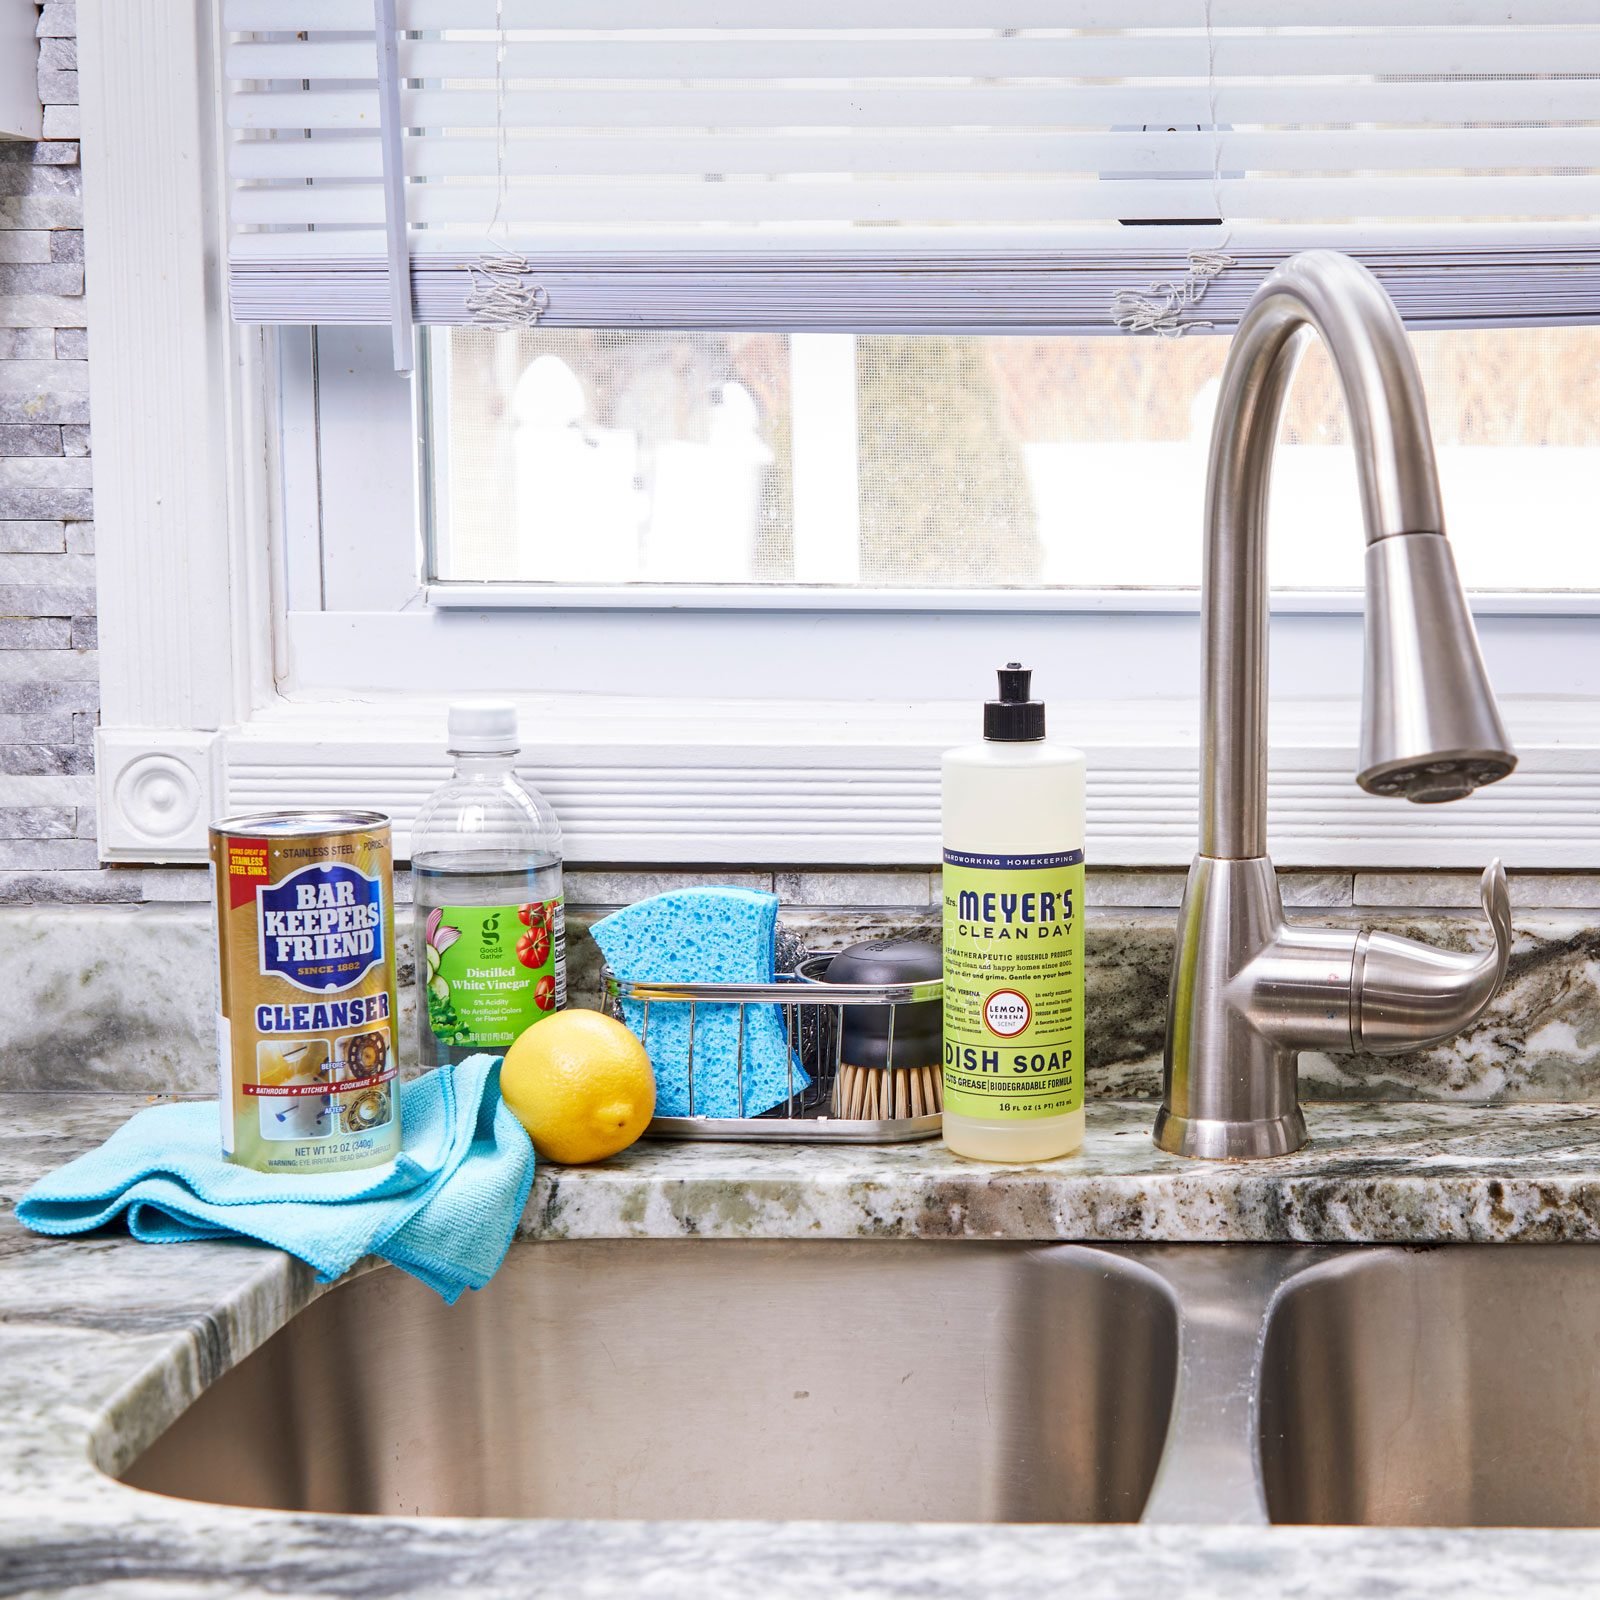 How to Remove Scratches and Maintain Stainless Steel Sinks